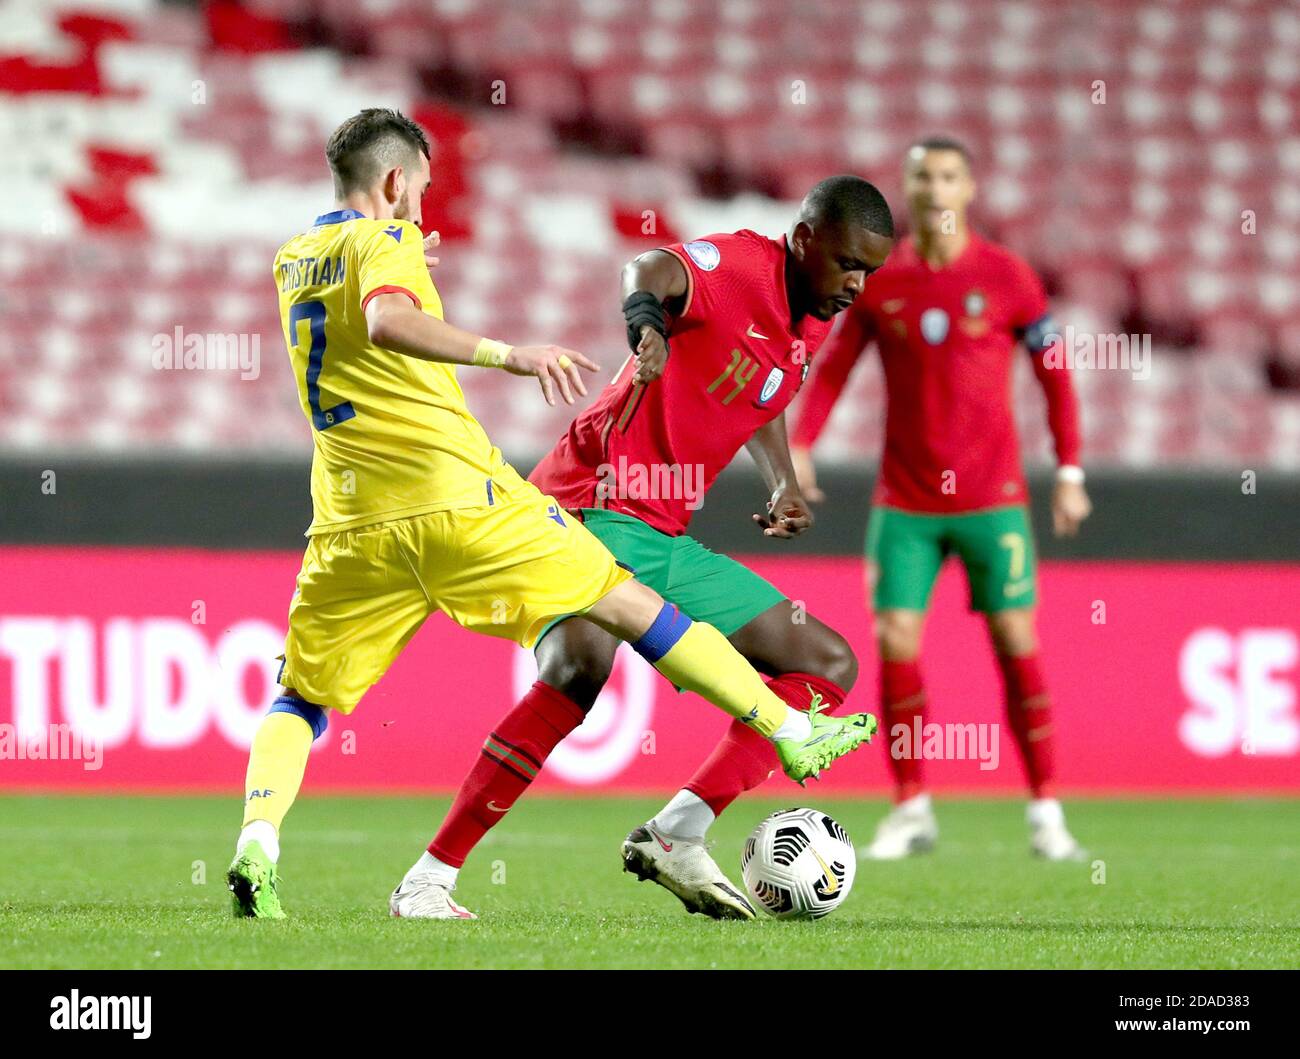 Lisbon, Portugal. 11th Nov, 2020. William Carvalho (front R) of Portugal vies with Cristian Martinez of Andorra during a friendly football match at the Luz stadium in Lisbon, Portugal, on Nov. 11, 2020. Credit: Pedro Fiuza/Xinhua/Alamy Live News Stock Photo